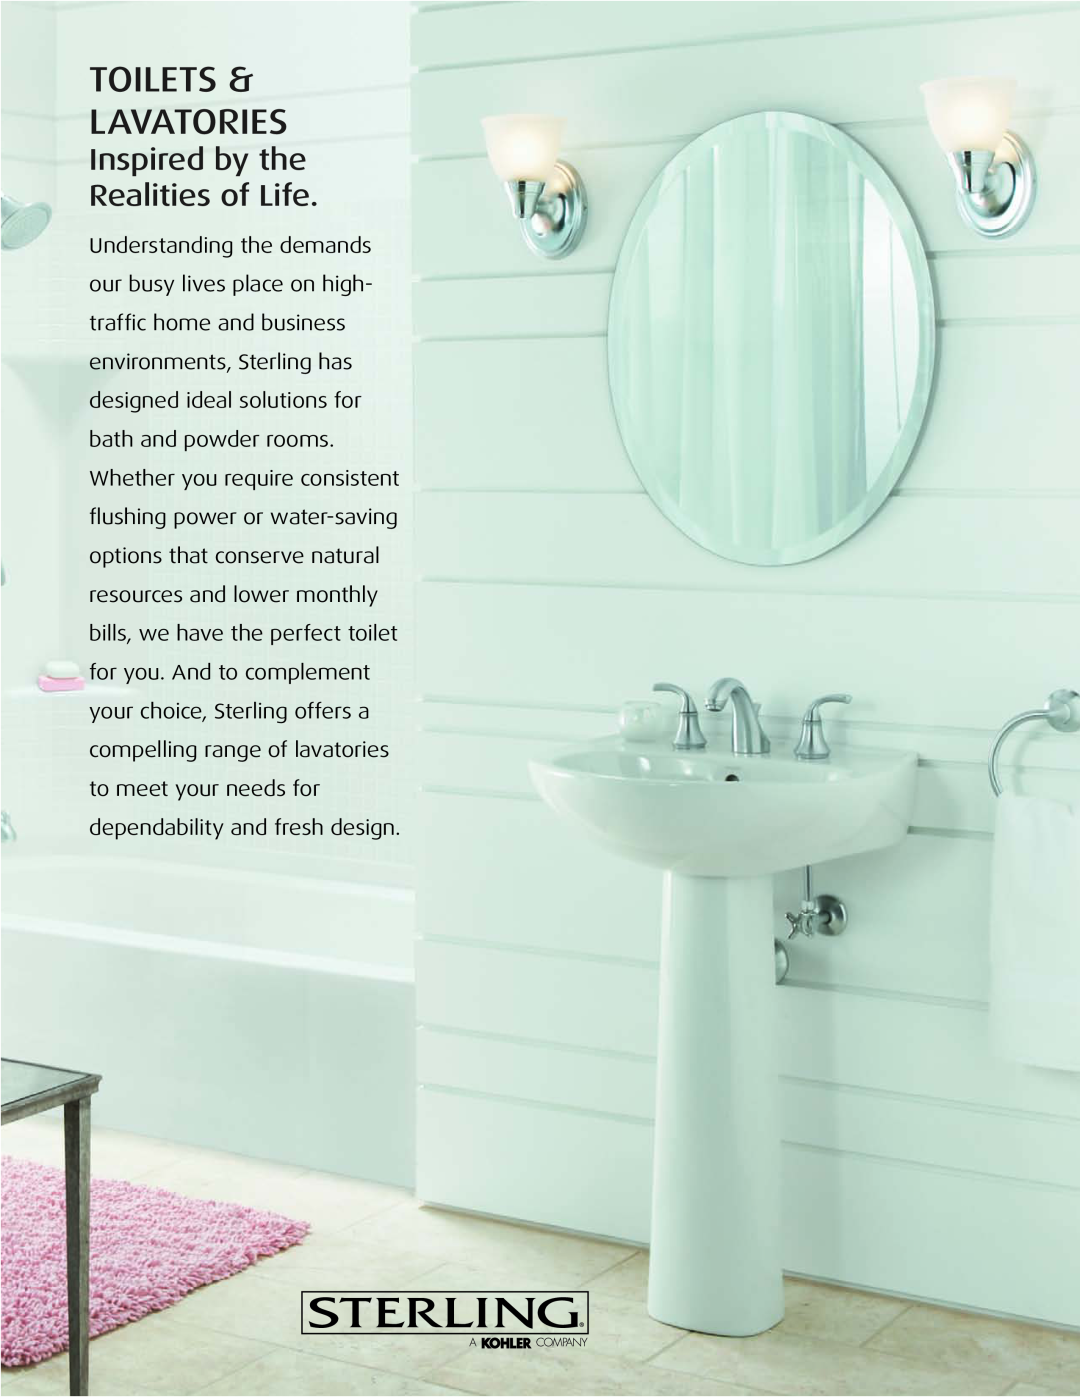 Sterling Plumbing Toilet & Lavatories manual Toilets & Lavatories, Inspired by the Realities of Life 